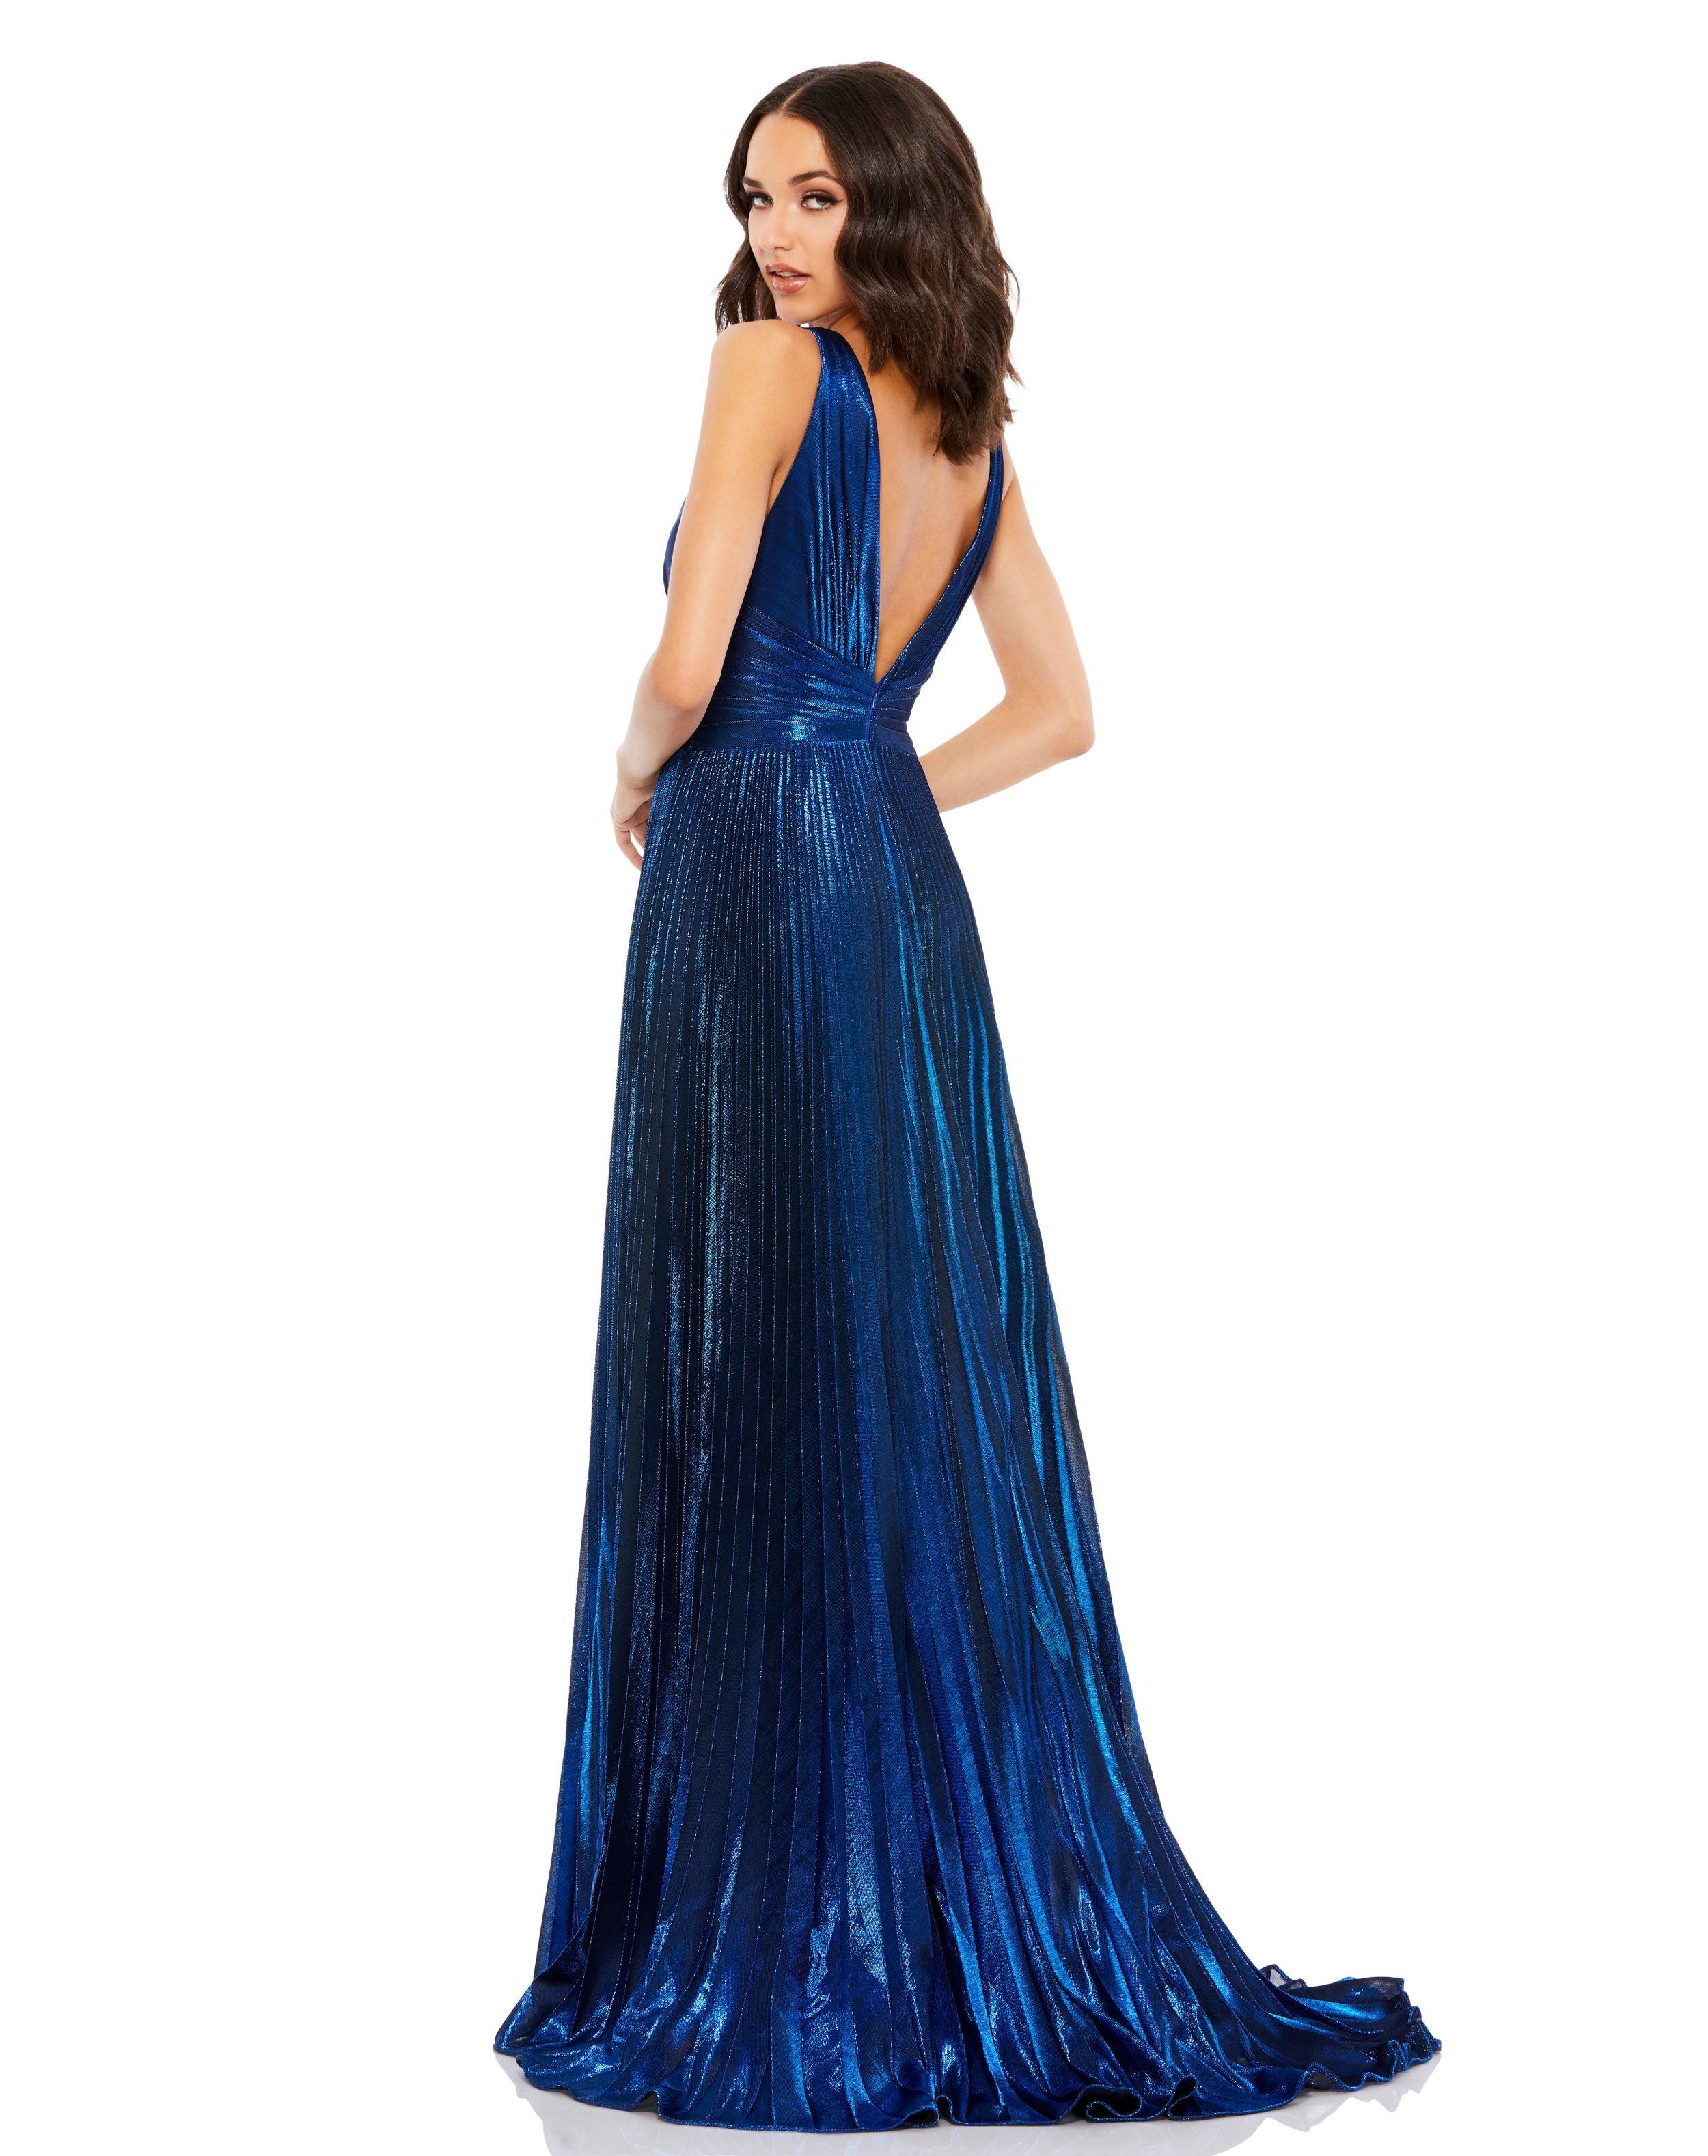 Plunge Neck Pleated Metallic Gown